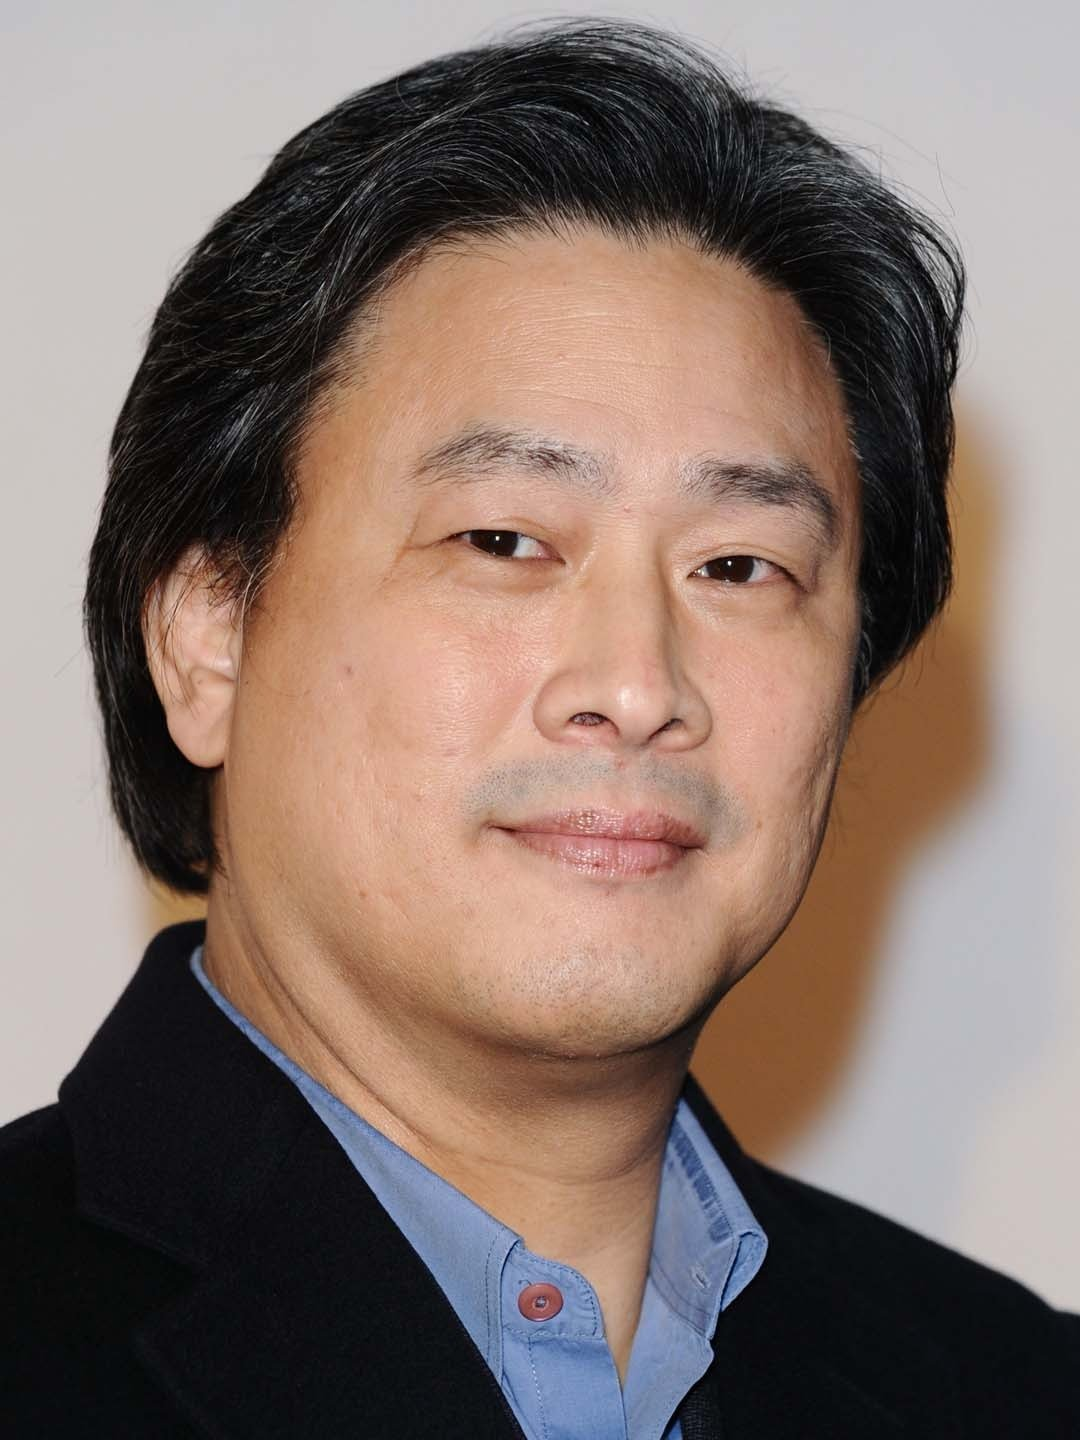 Park Chan Wook